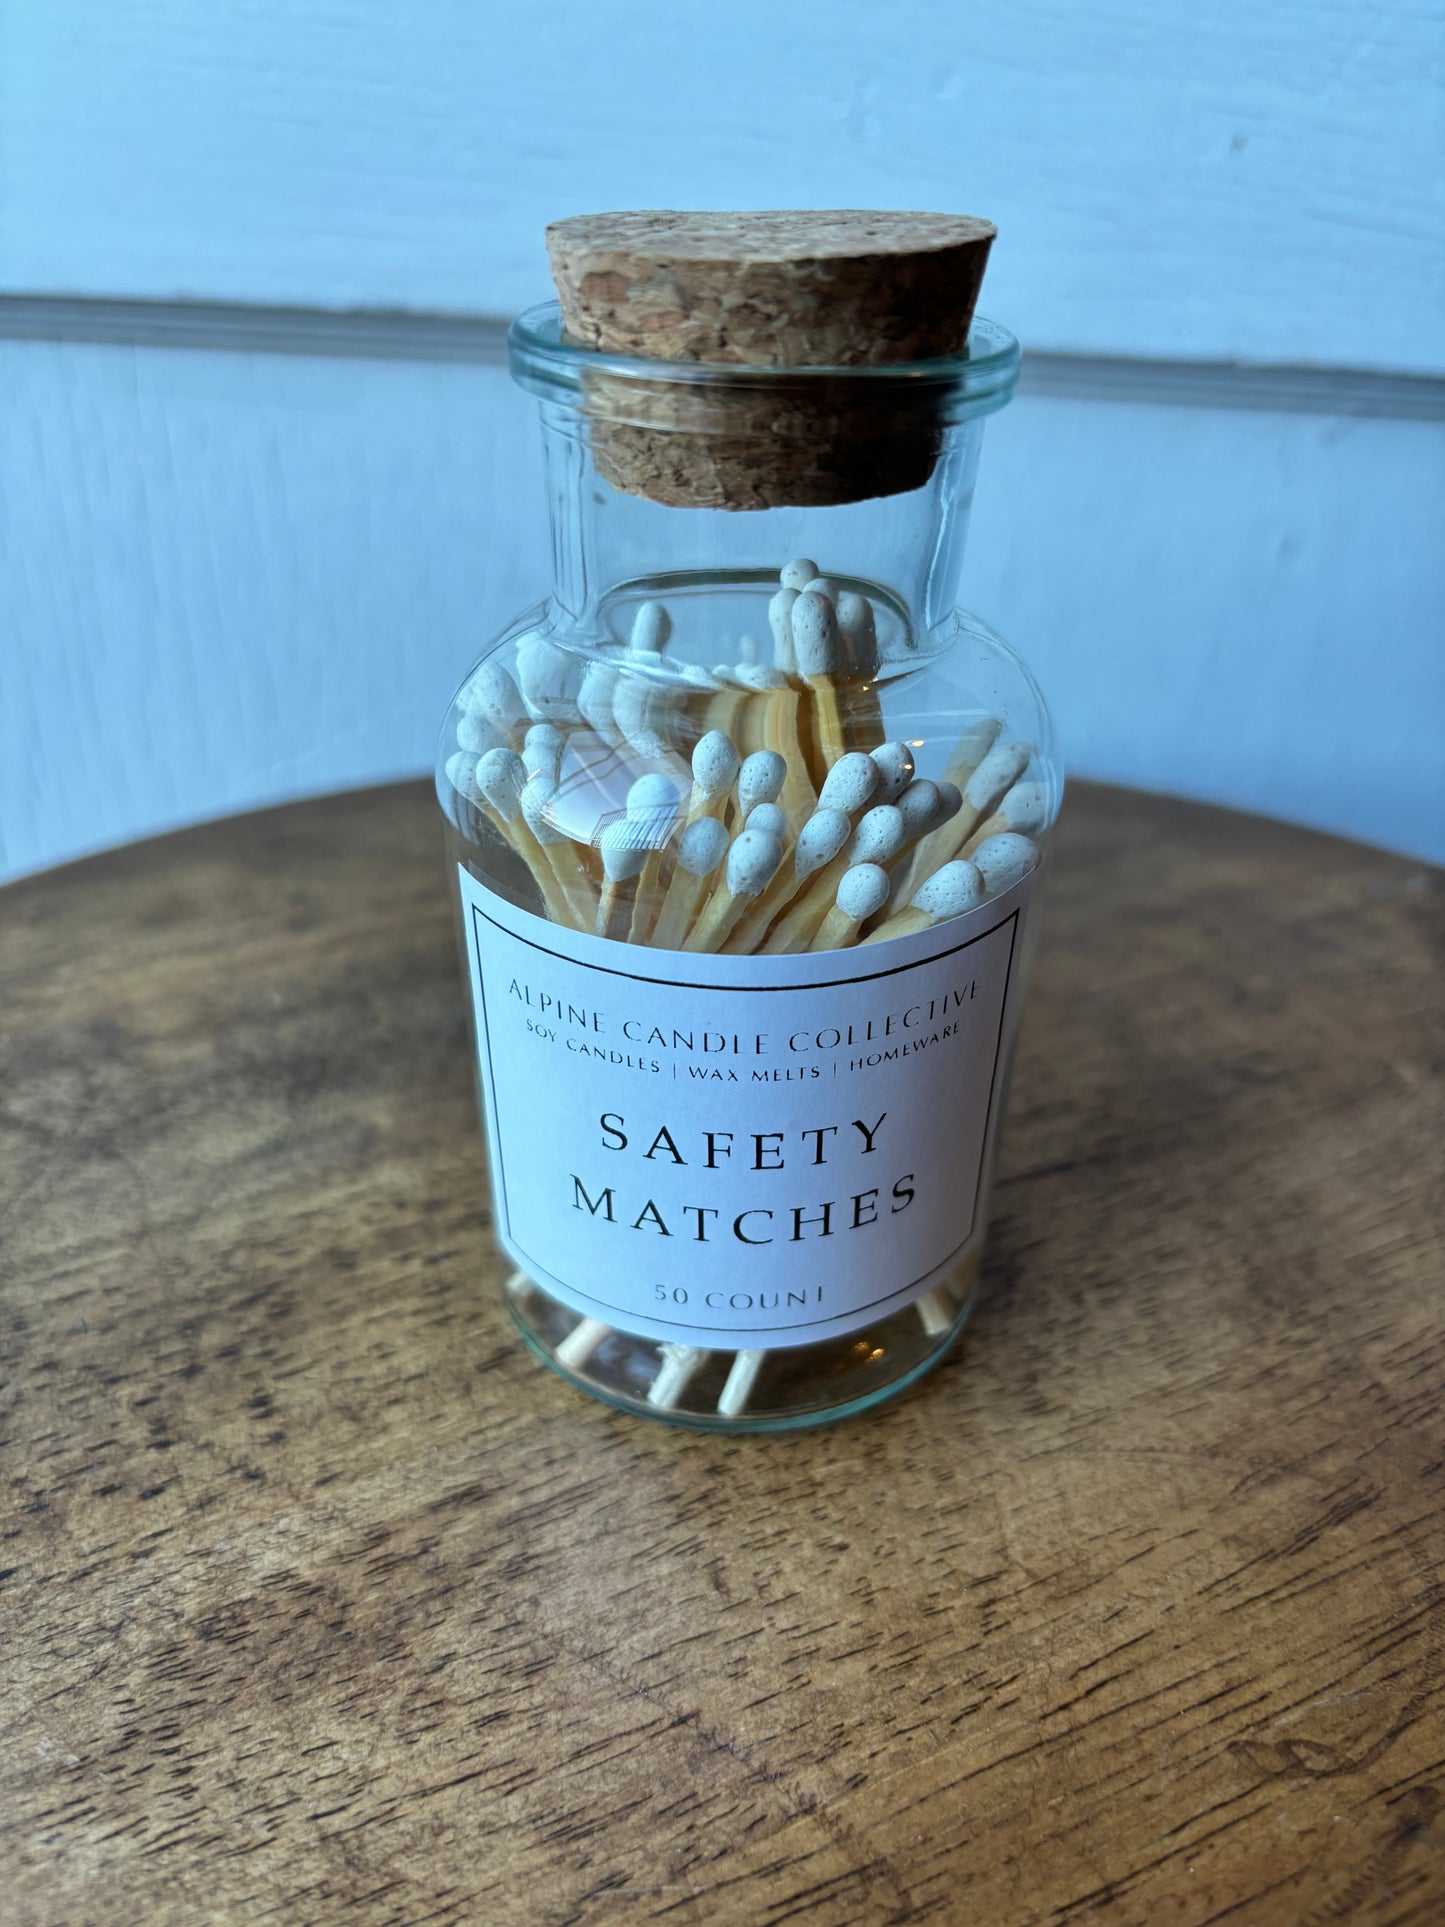 SAFETY MATCHES